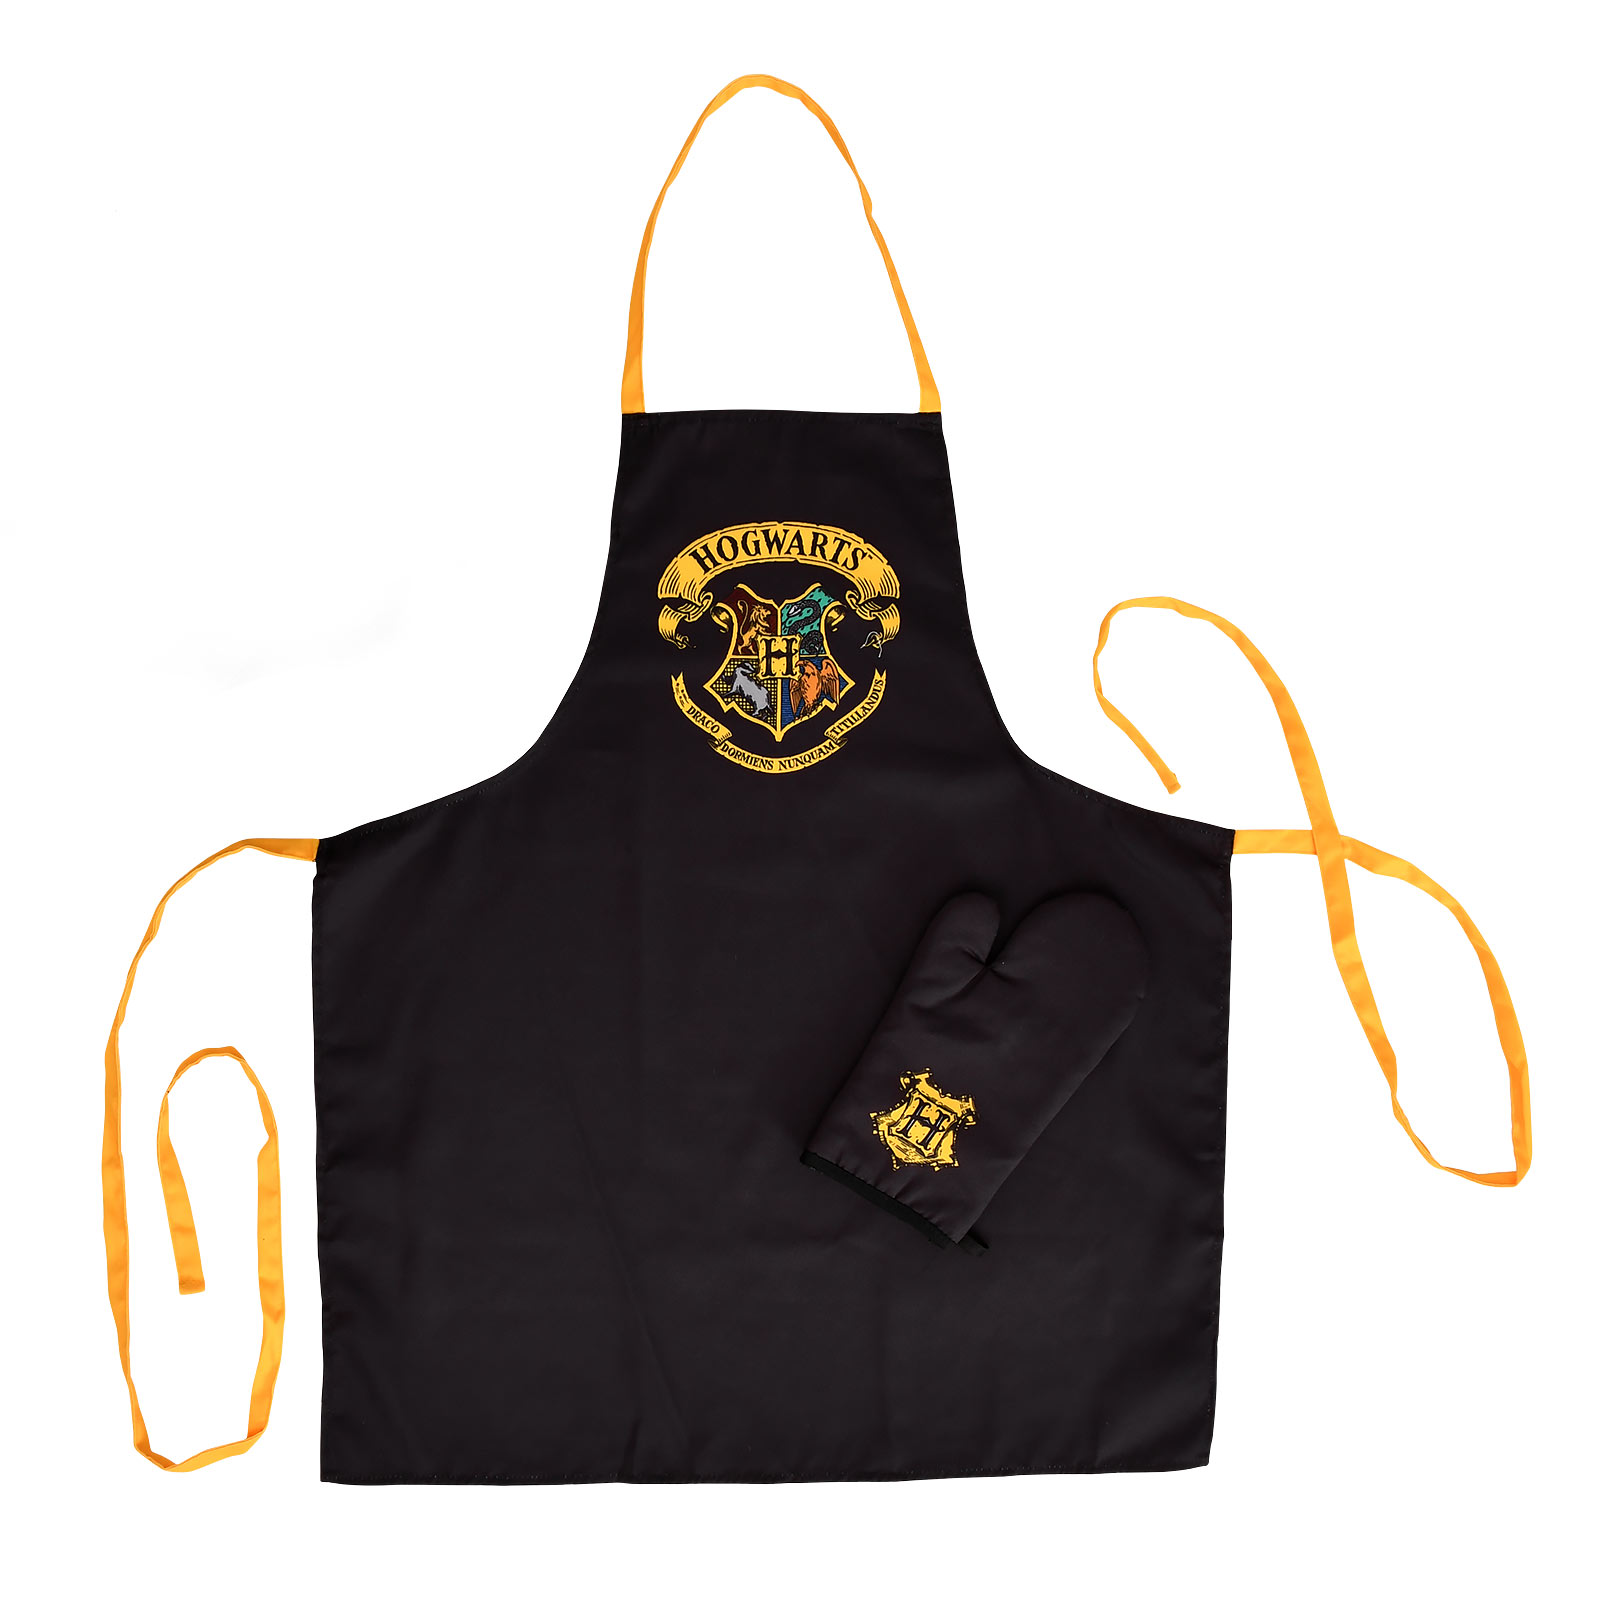 Harry Potter - Hogwarts Apron with Oven Glove